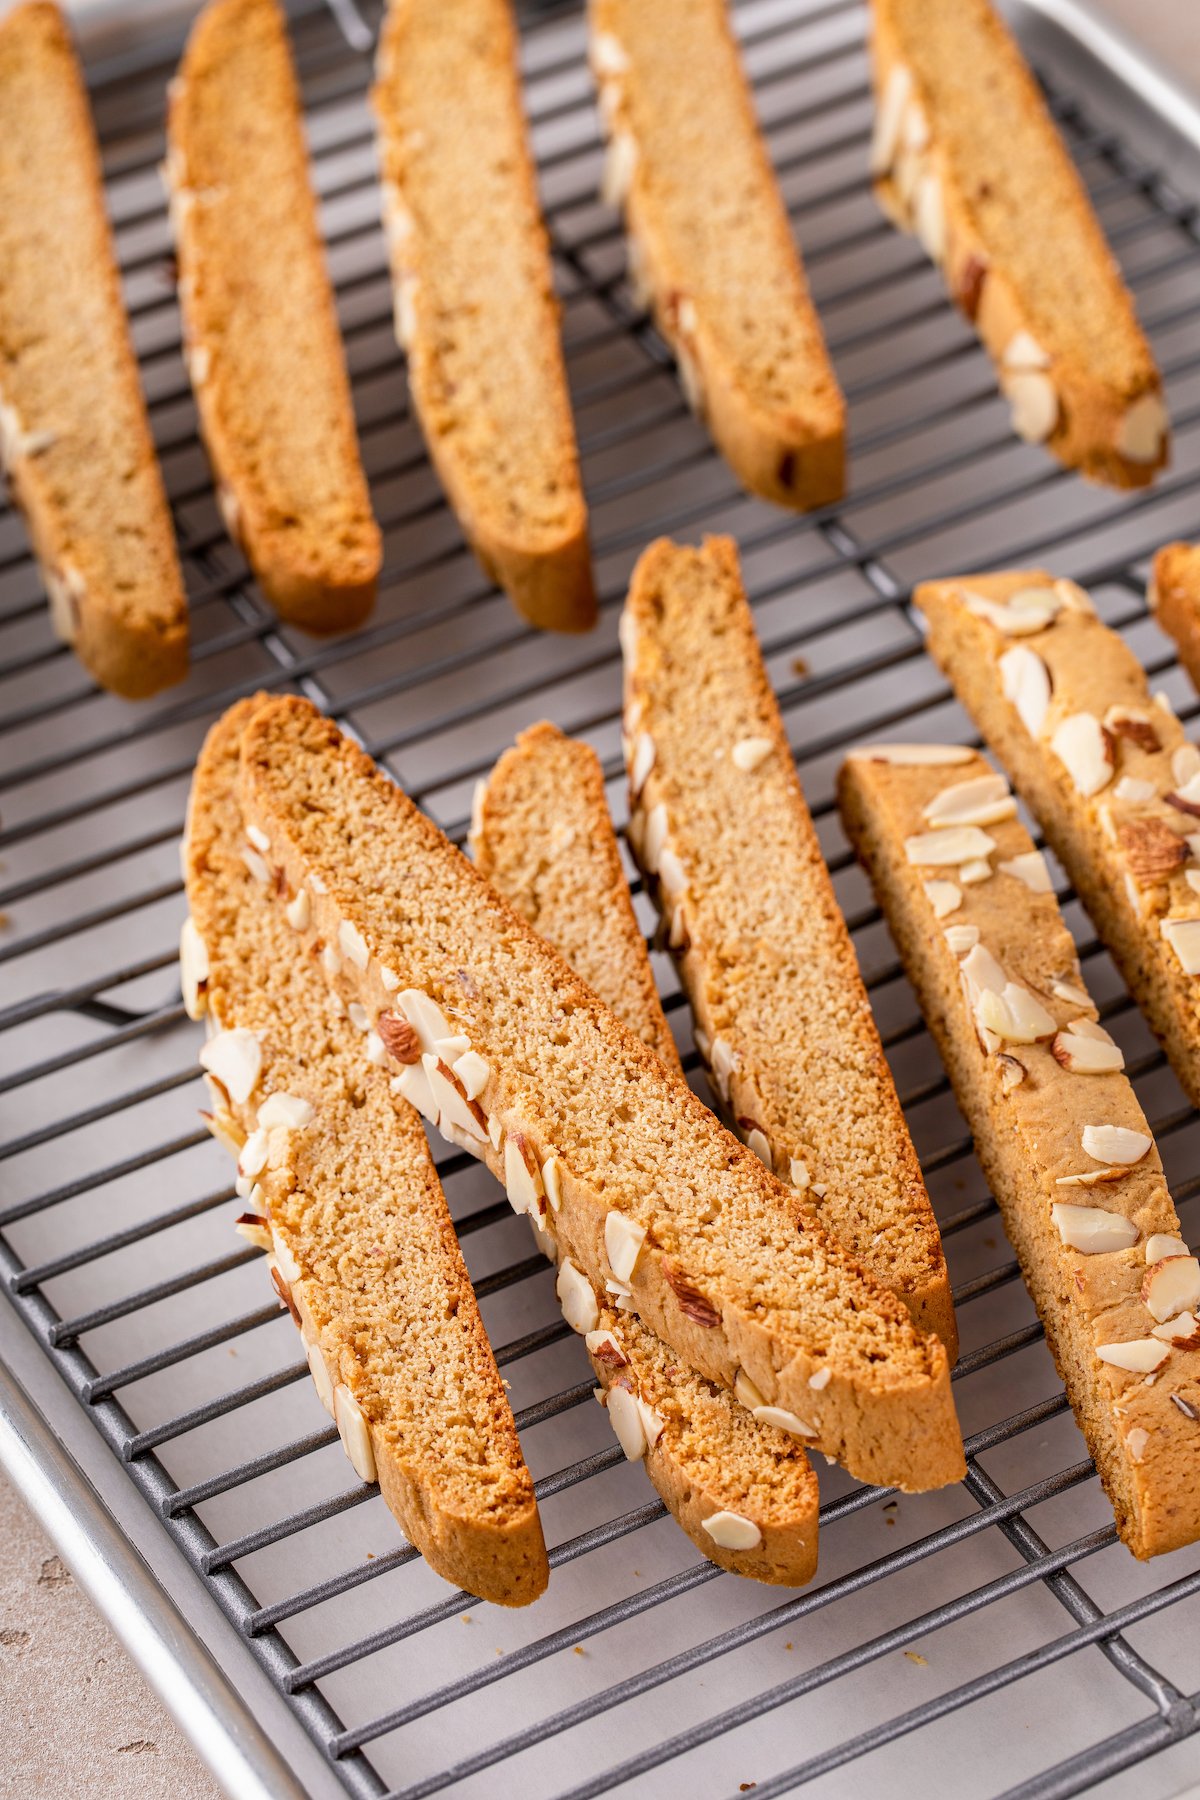 Biscotti cooling on a rack.